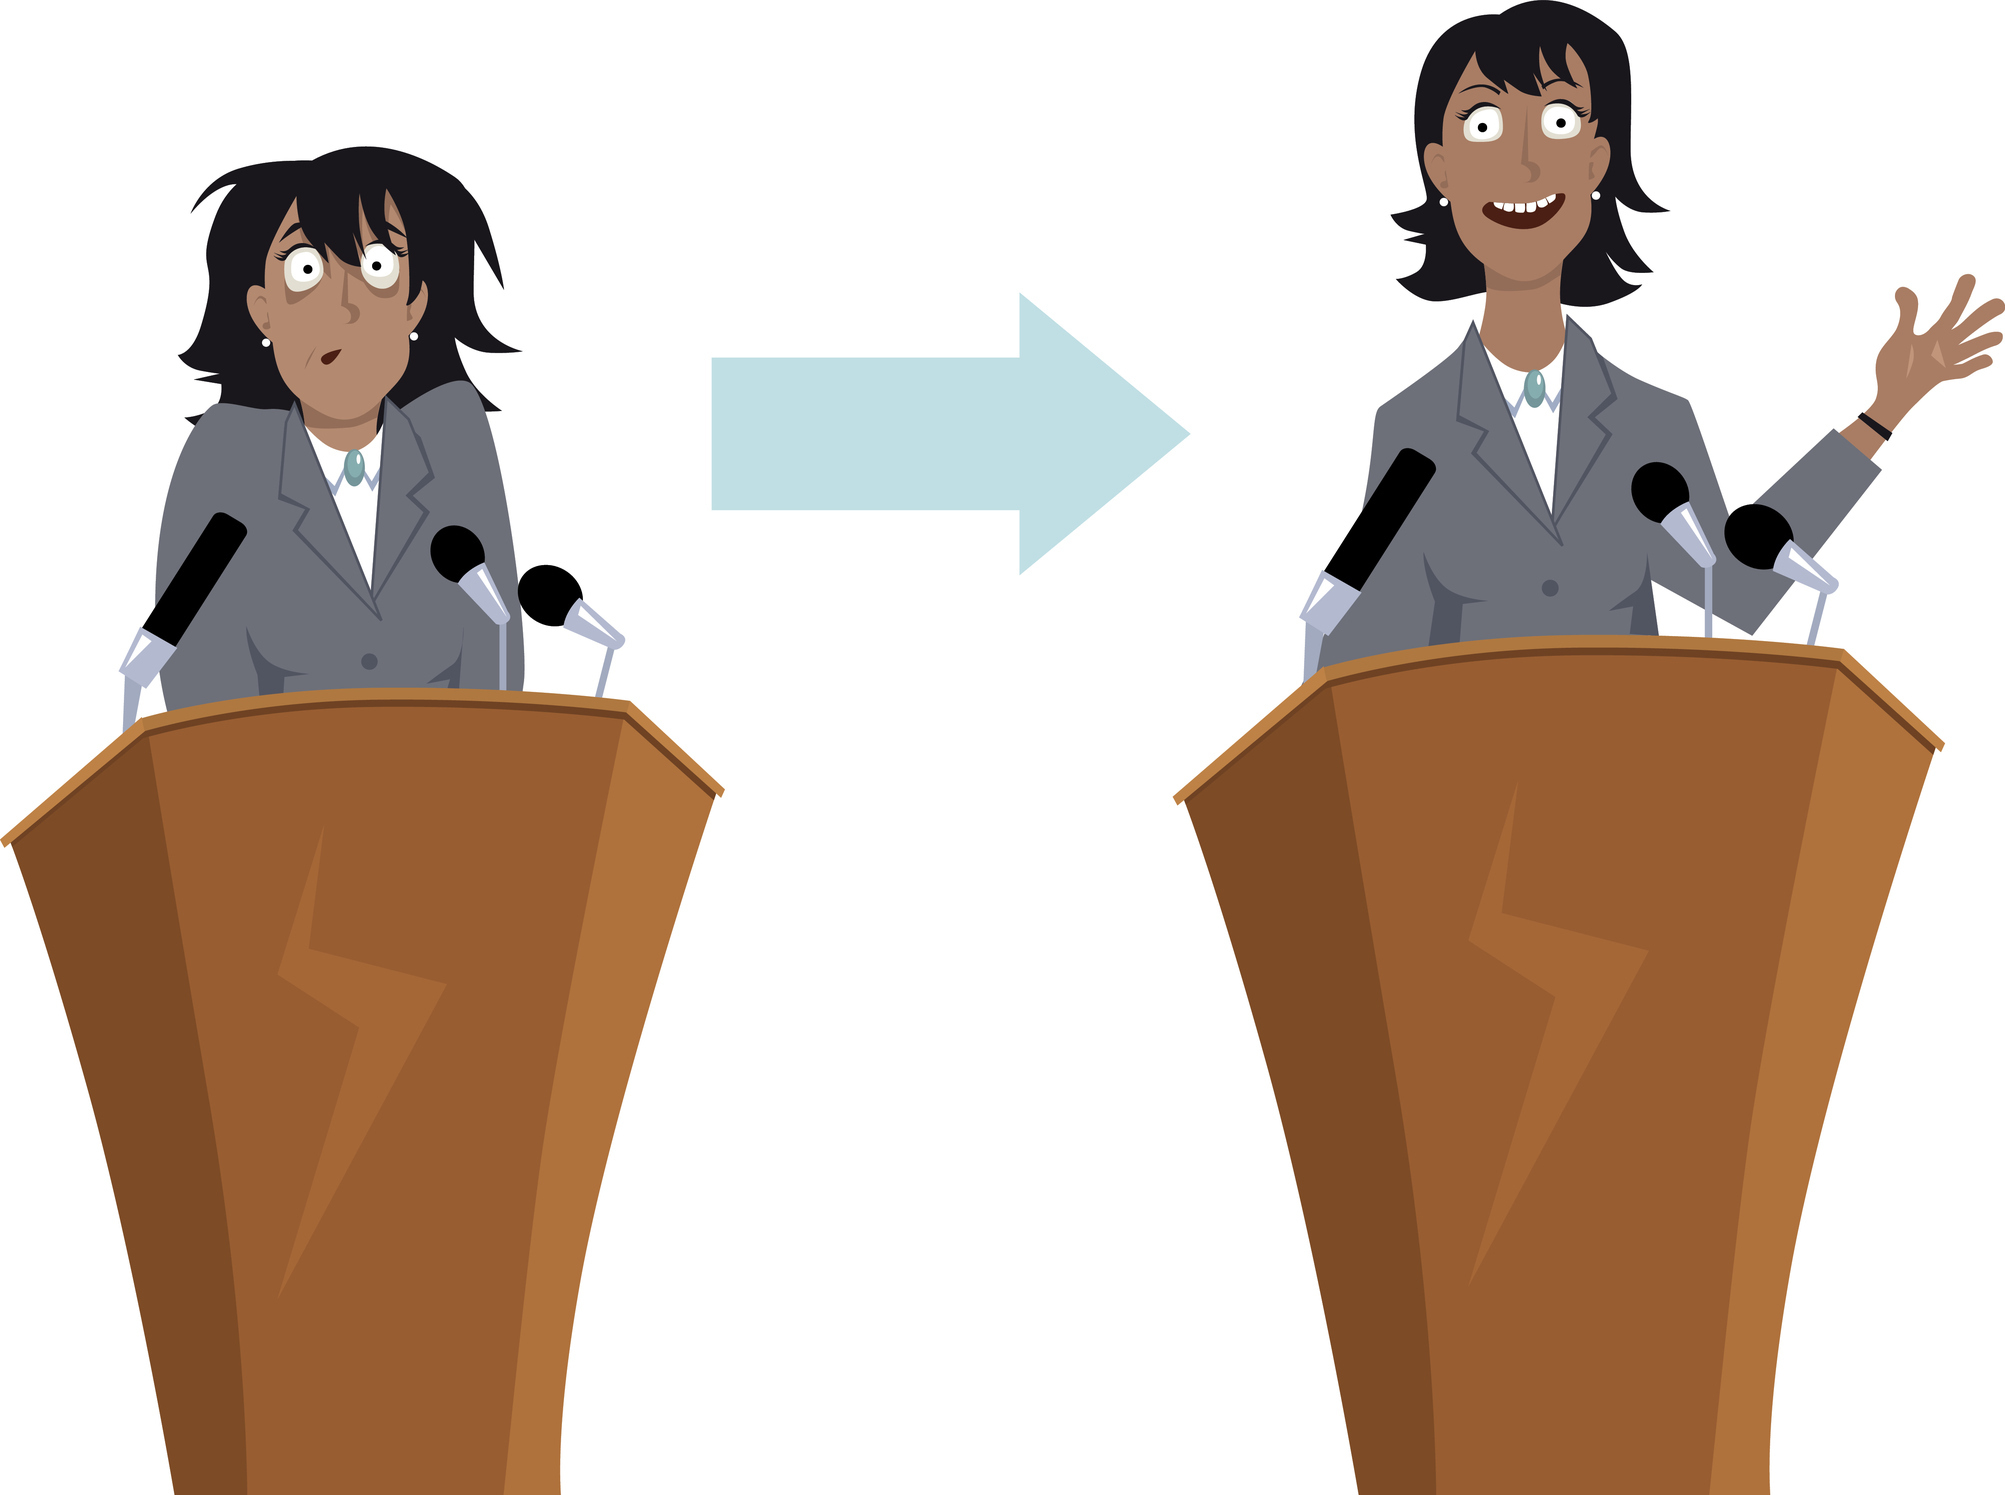 Why Do Students Fear Public Speaking?